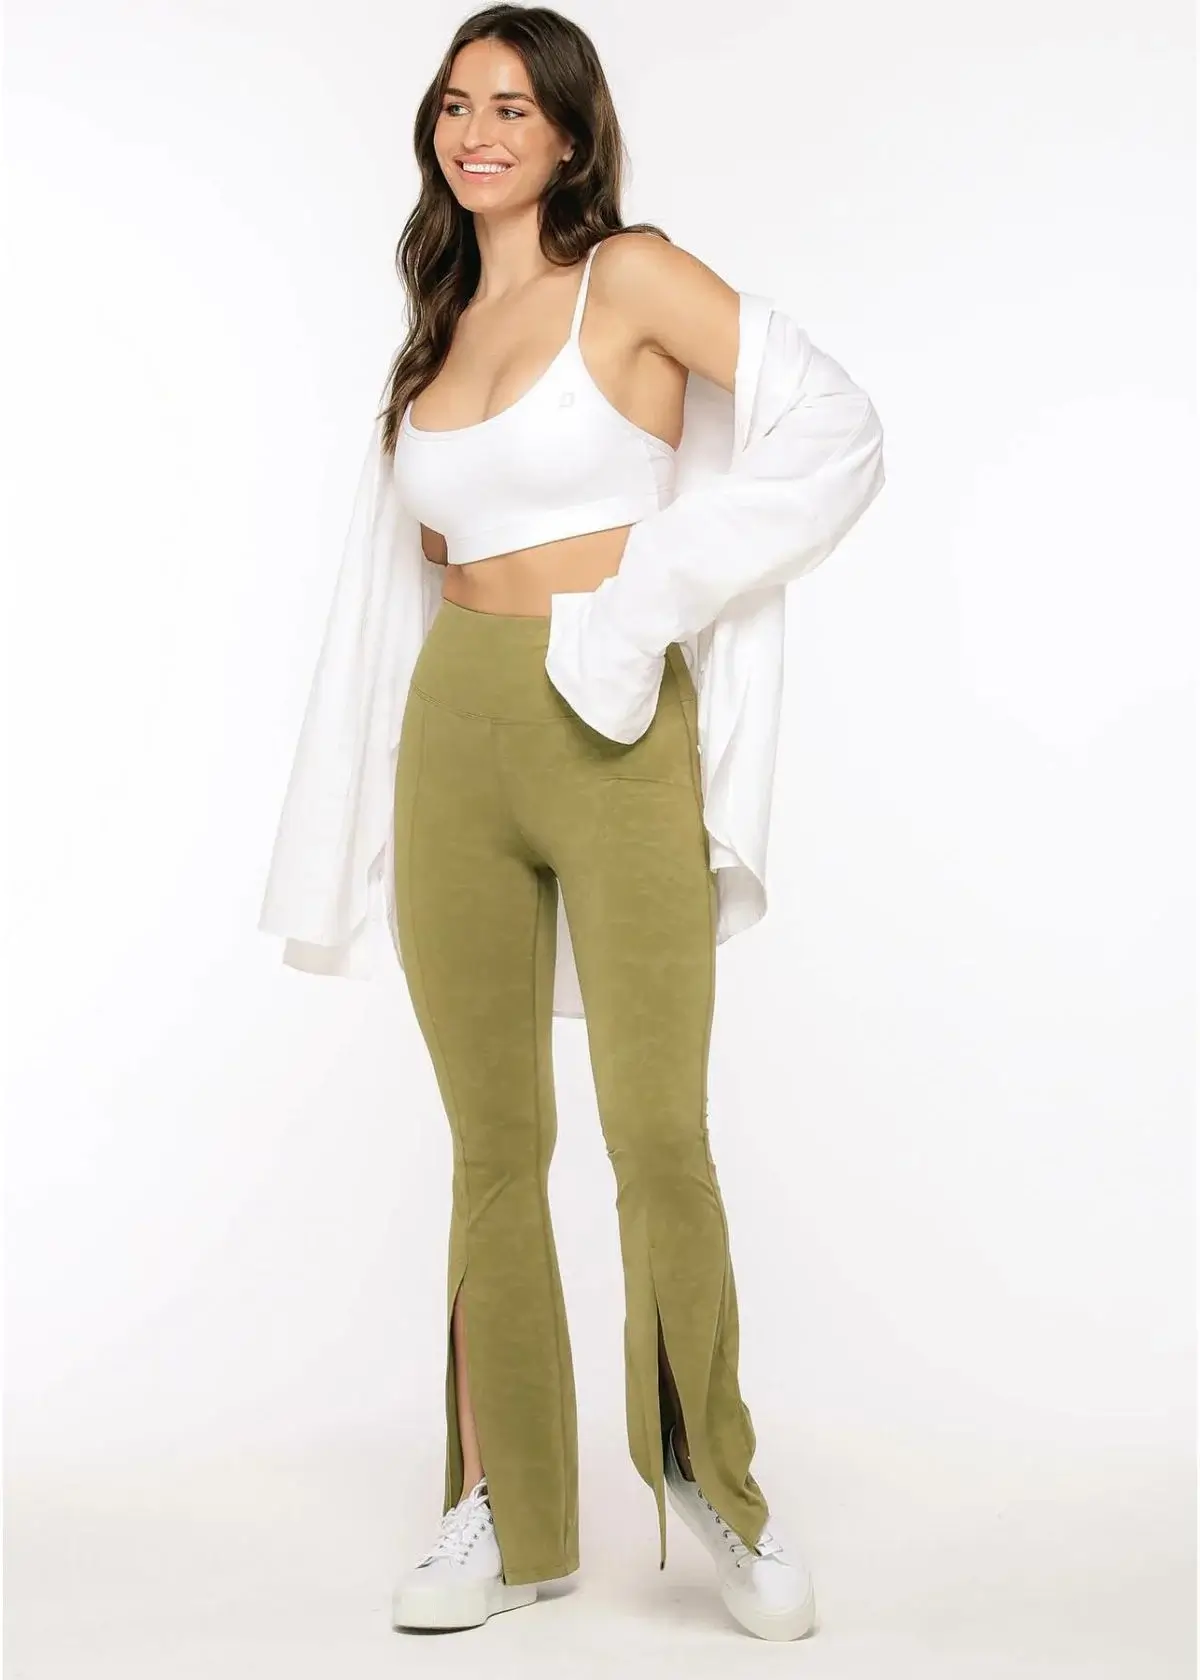 Can I find flare leggings in different sizes and lengths?